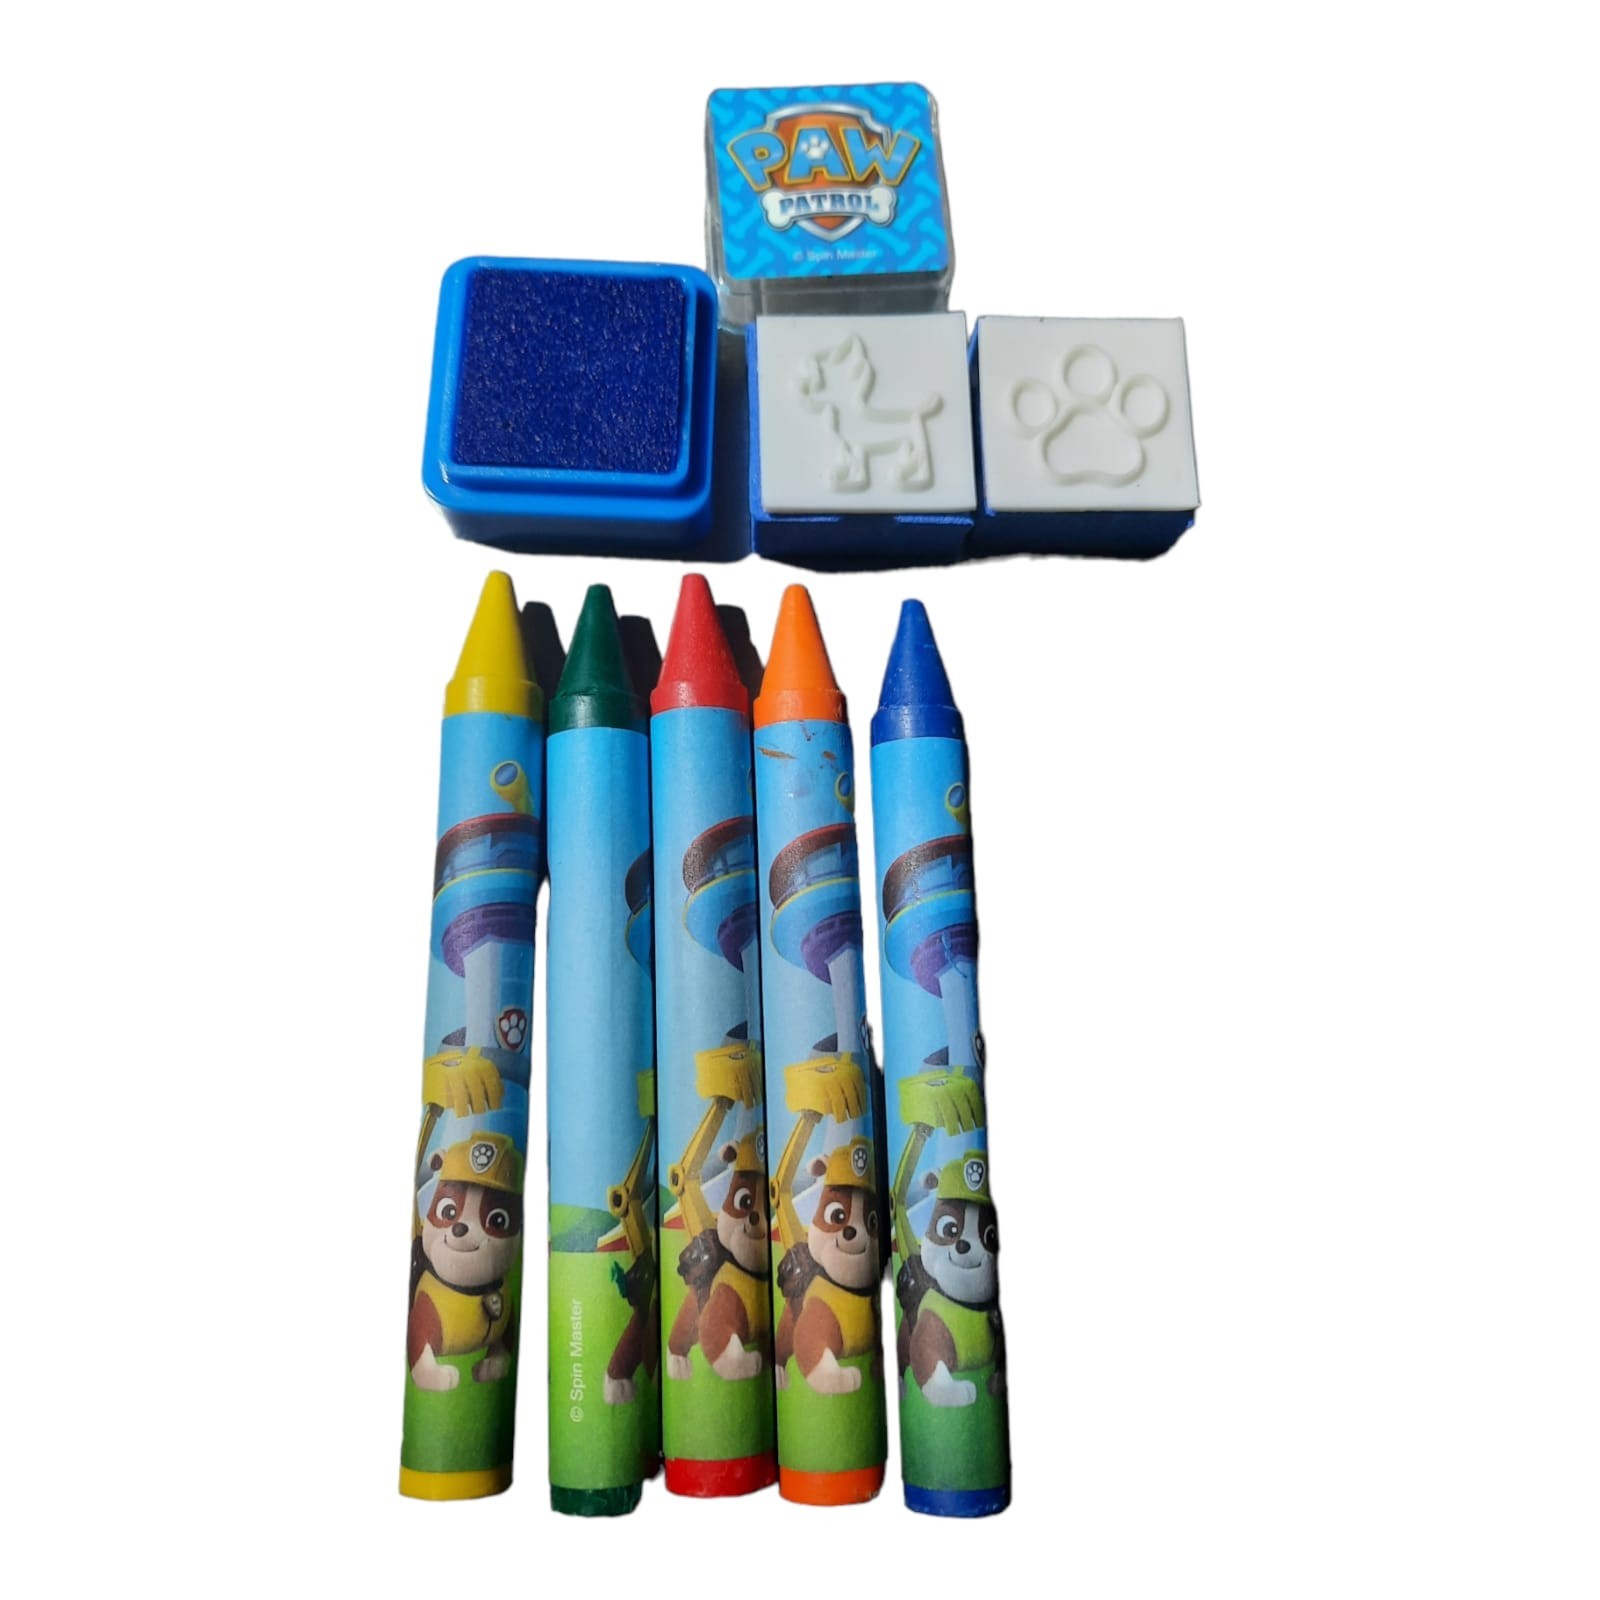 Anpro Gadget Compleanno Bambini, 141Pcs -  - Offerte E Coupon:  #BESLY!